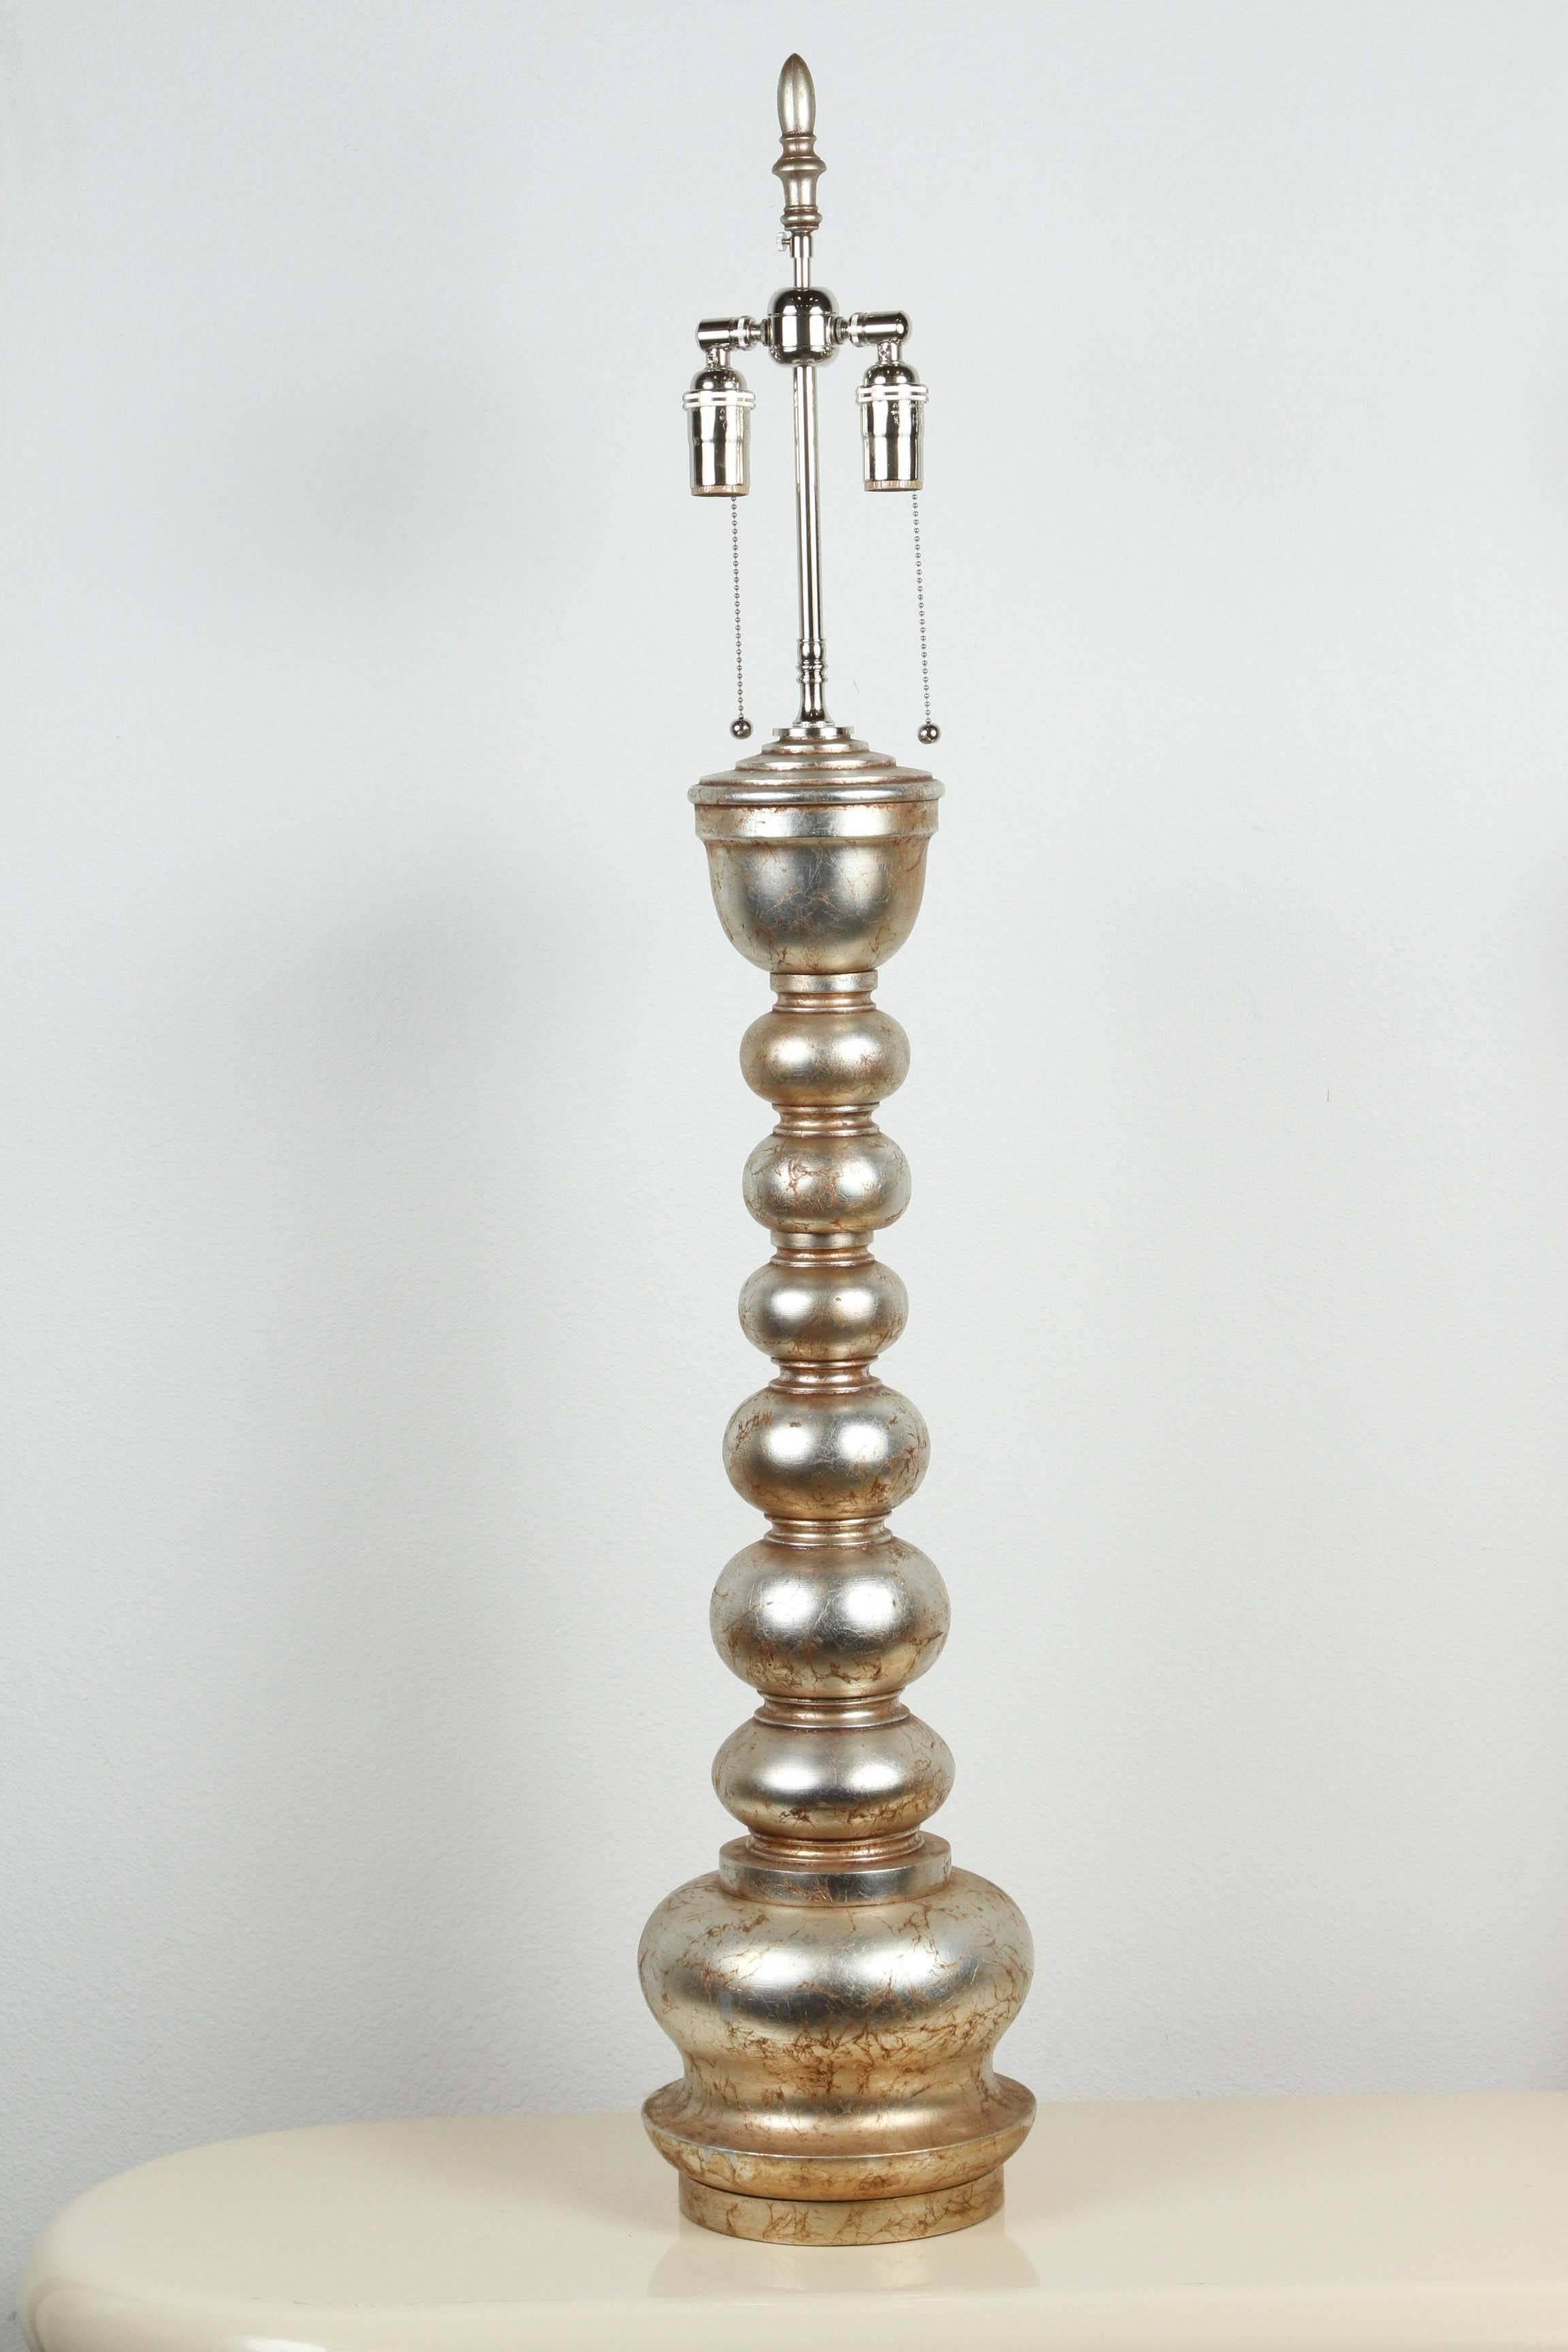 Pair of magnificent pagoda style lamps by James Mont. 
The lamps are finished in burnished glazed silver leaf and have been Newly rewired with polished nickel double clusters.
This design was made in two different sizes. ( This is the big one.)